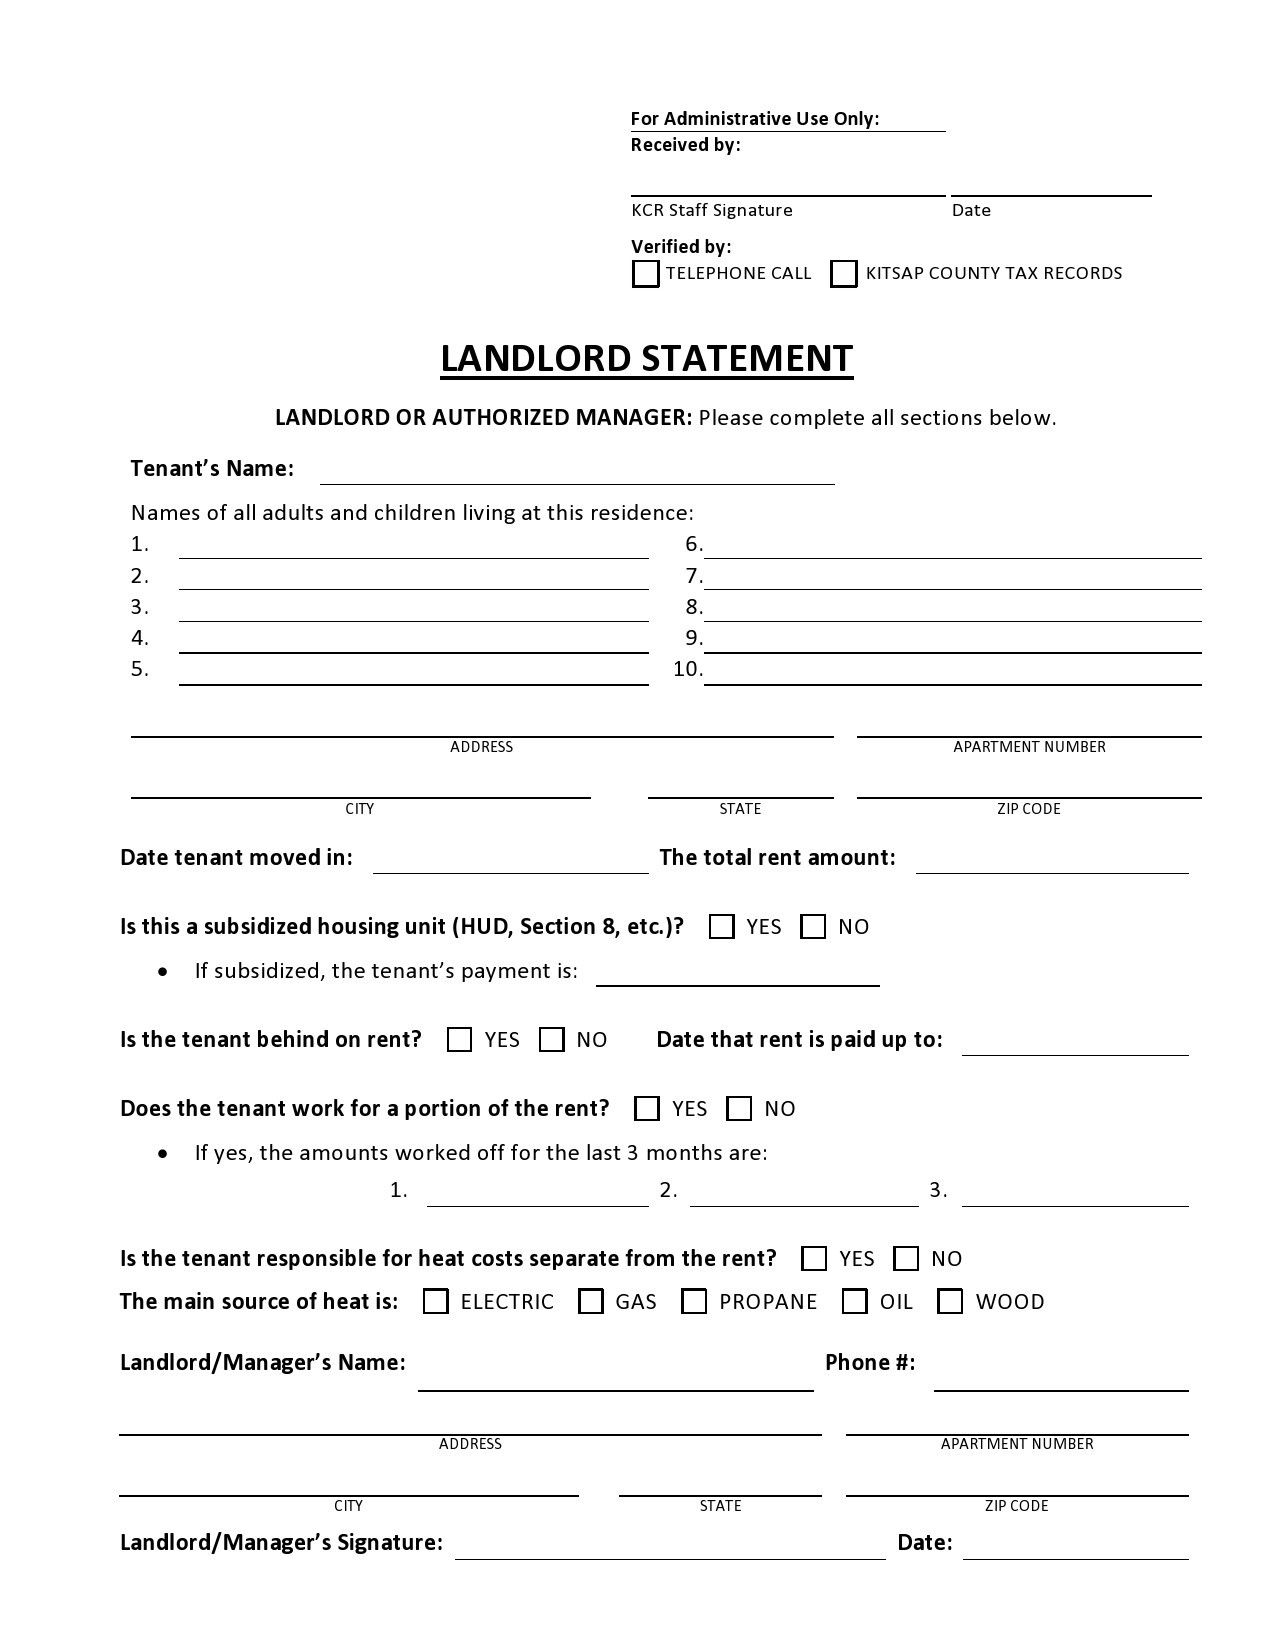 43 Perfect Landlord Statement Forms Letters TemplateLab